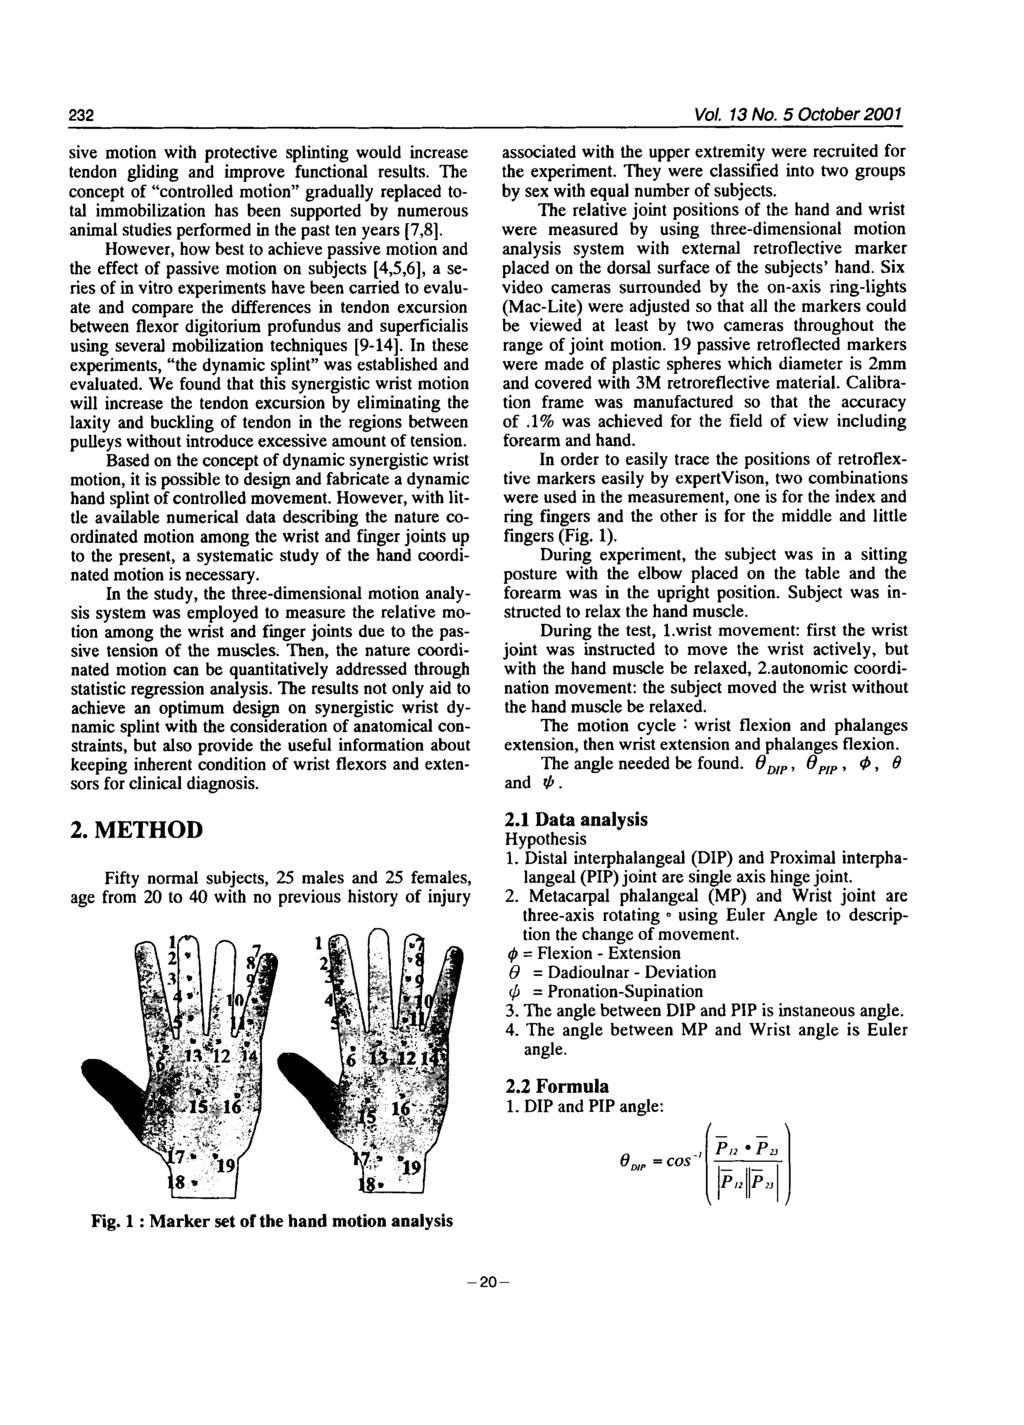 Biomed. Eng. Appl. Bsis Commun. 2001.13:231-241. Downloded from www.worldscientific.com 232 live motion with protective splinting would increse tendon gliding nd improve functionl results.